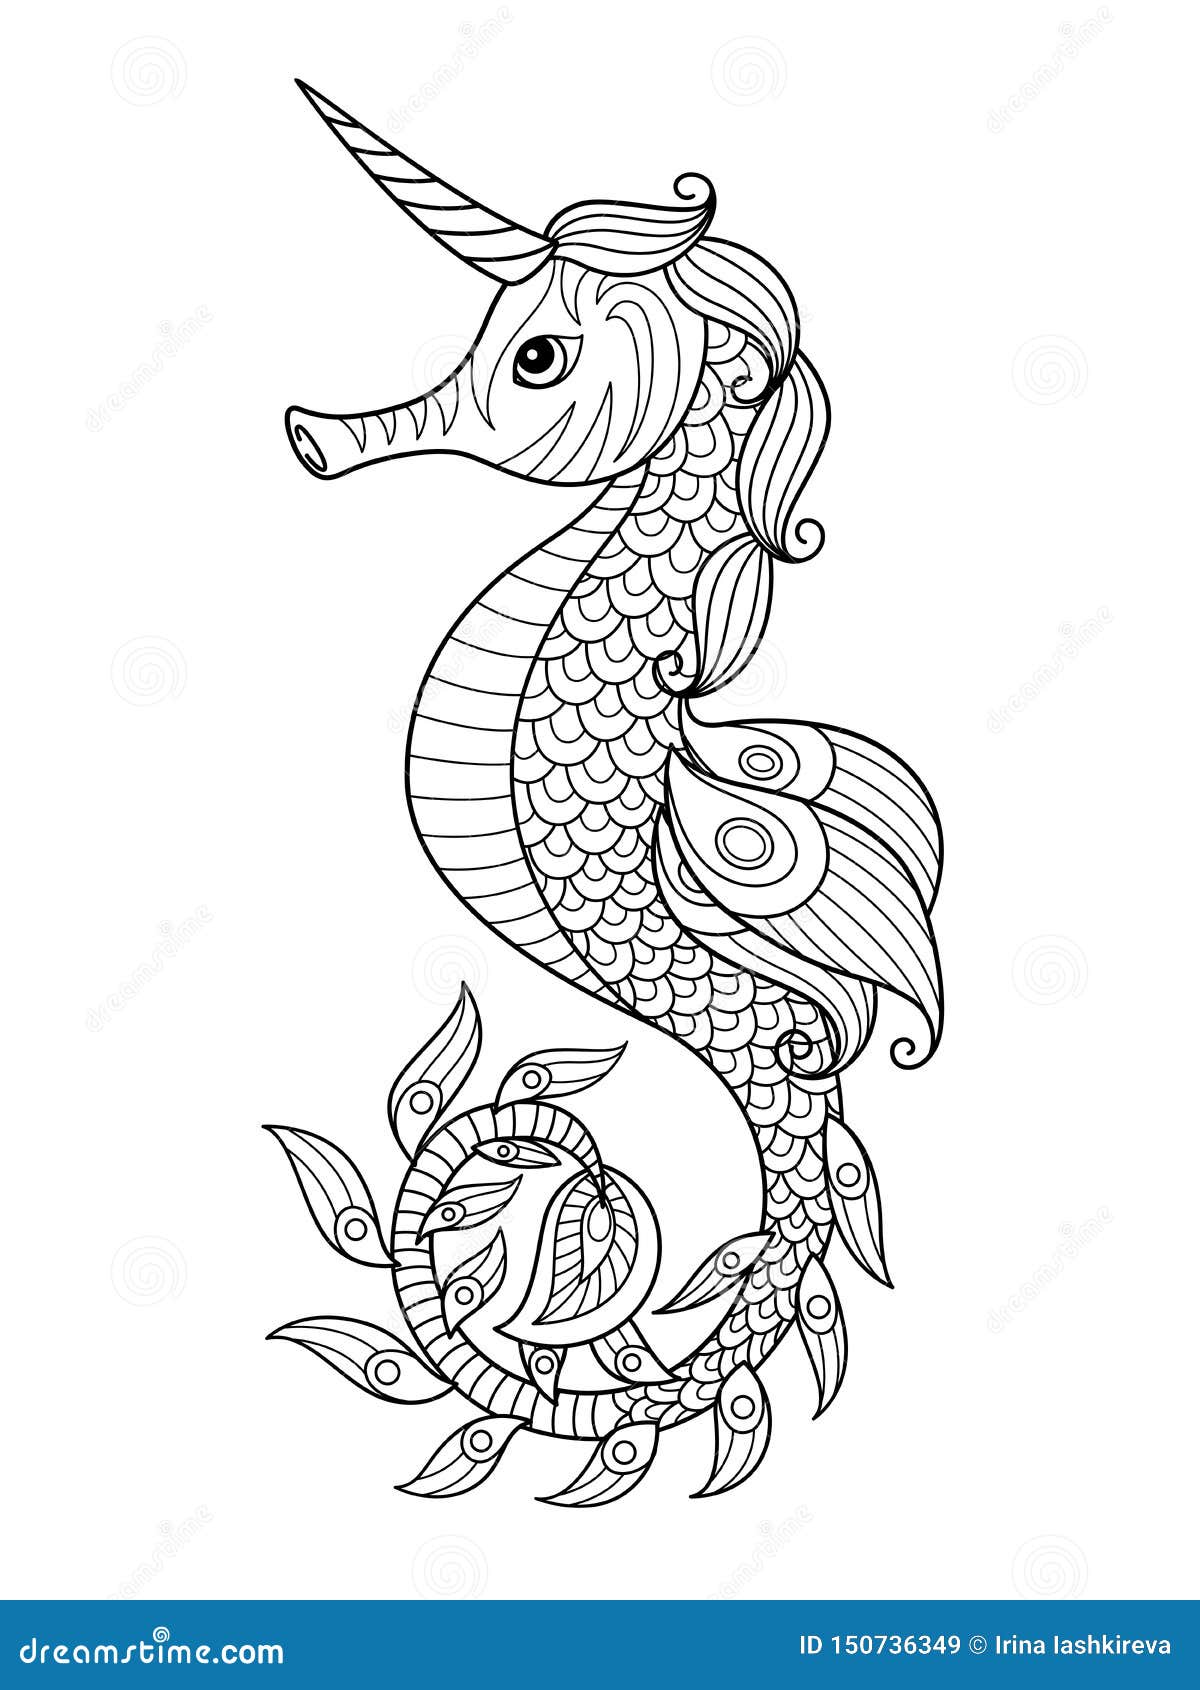 Coloring book seahorse stock illustrations â coloring book seahorse stock illustrations vectors clipart